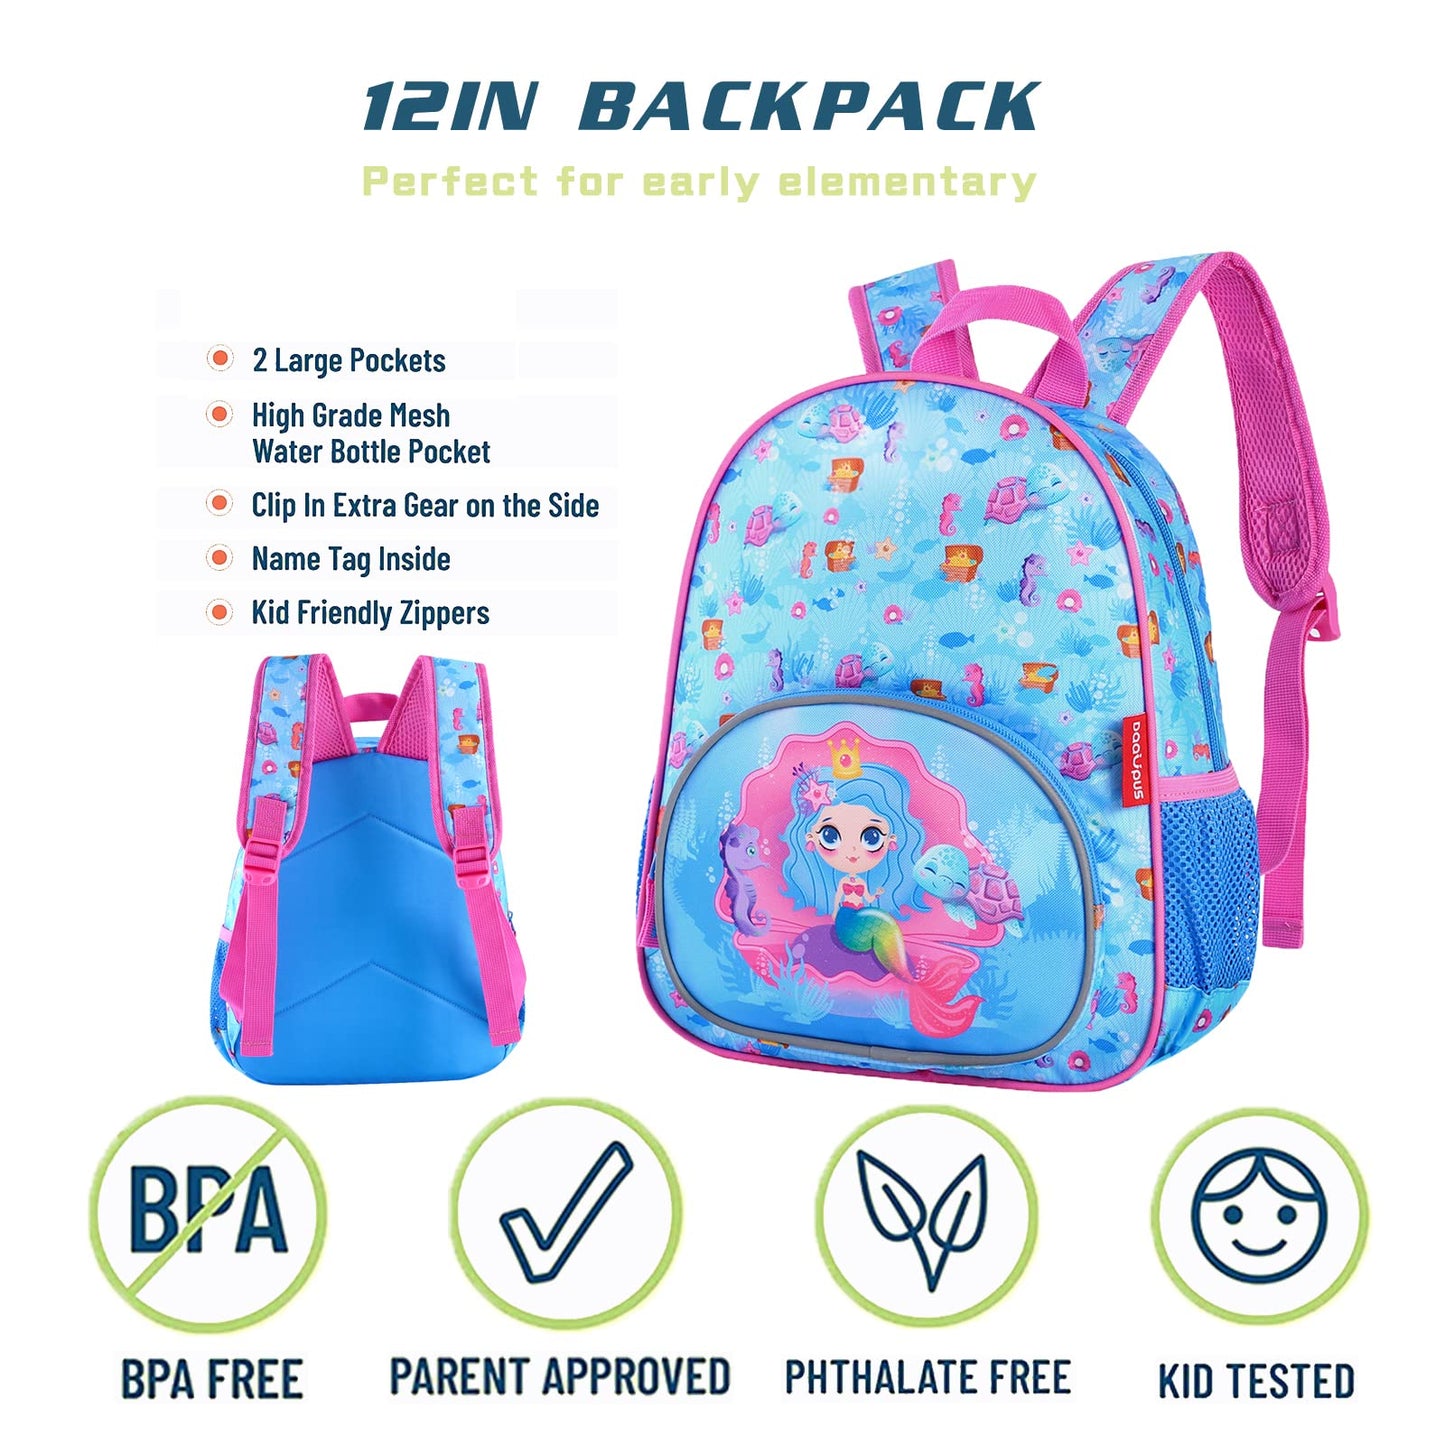 Daaupus 12-Inch girl preschool backpack,Kids Backpack for Boys & Girls, Perfect for Daycare and Preschool…